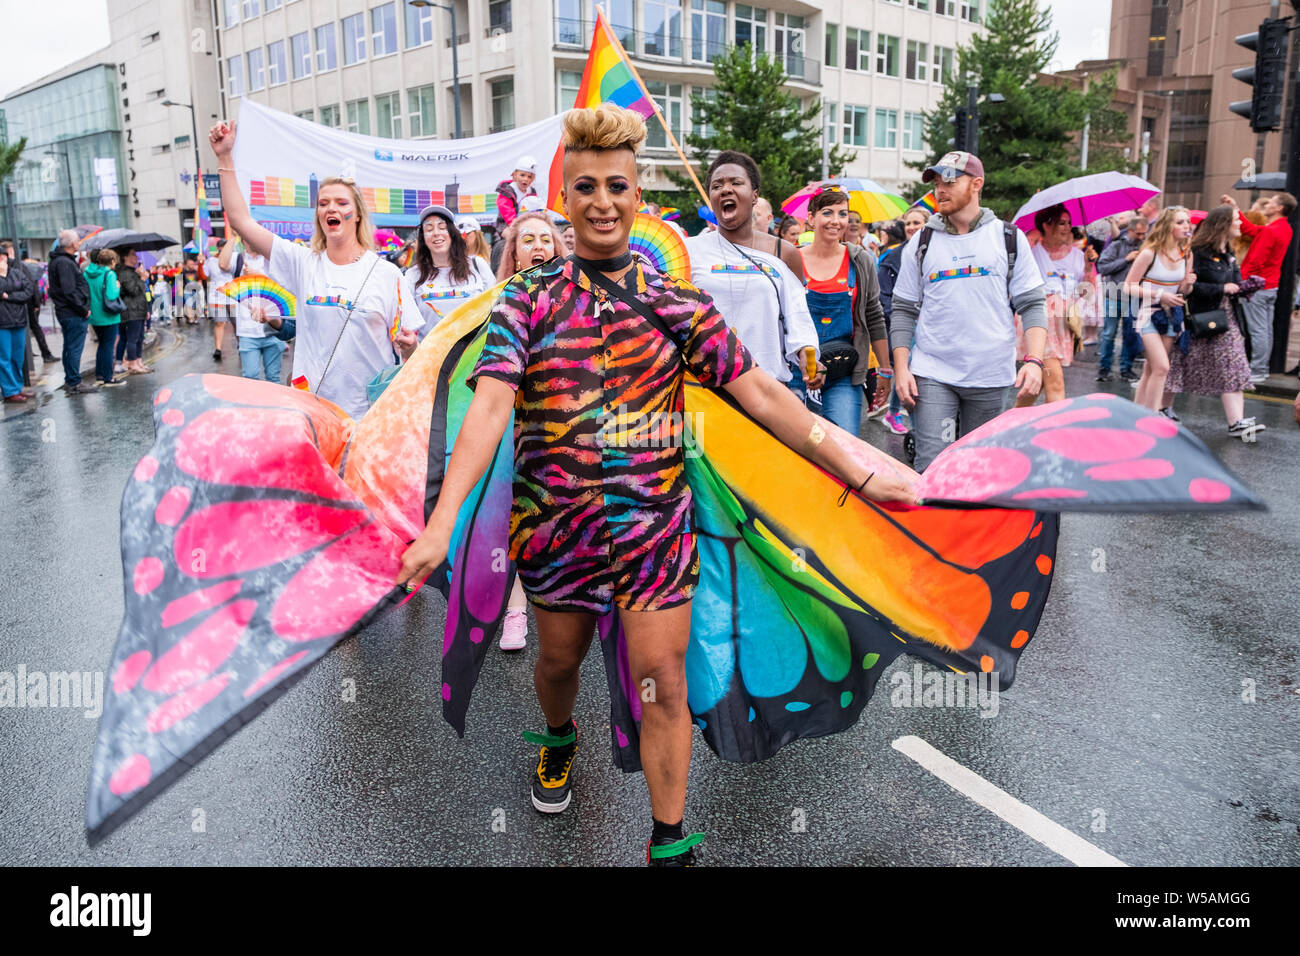 Liverpool, UK. July 27, 2019. Thousands of people, despite the rain, joined a march through Liverpool city centre on Saturday, July 27, 2019 to celebrate LGBT+ and its vibrant community under the slogan, 'Come As You Are'. The event is held annually in commemoration of the death of Michael Causer, a young gay man who was murdered in the city in 2008. Credit: Christopher Middleton/Alamy Live News Stock Photo